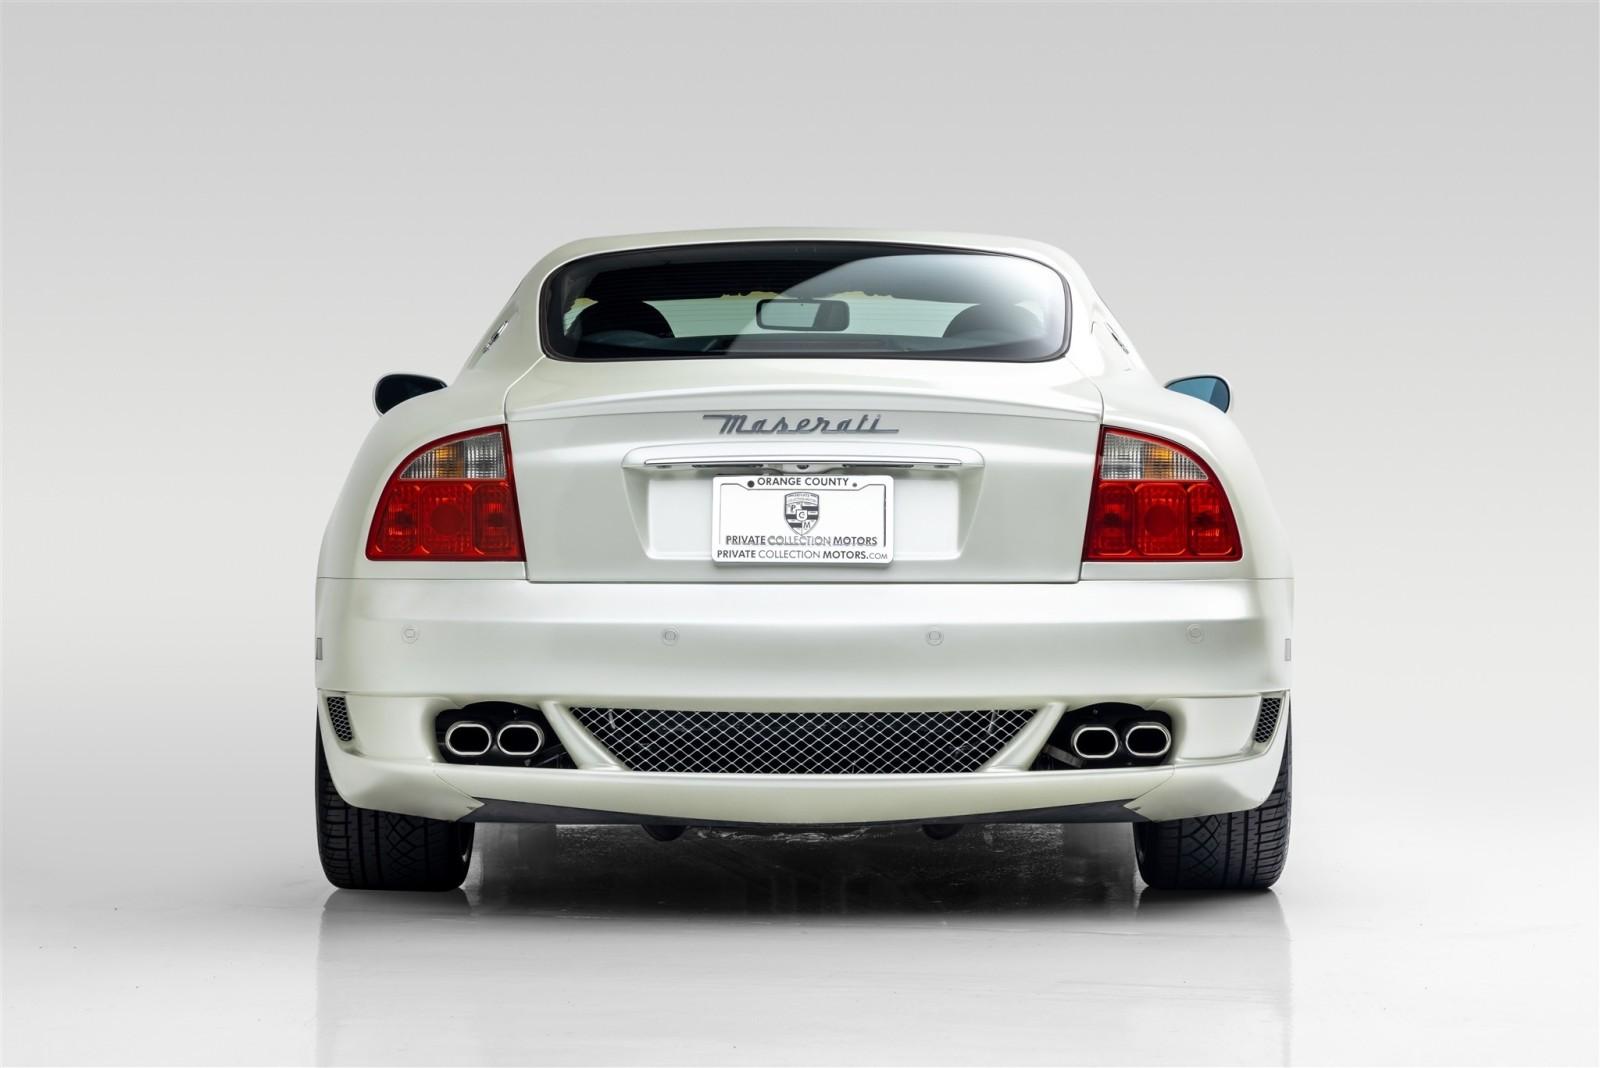 Used 2005 Maserati GranSport For Sale ($29,995) | Private Collection Motors  Inc Stock #B5798A